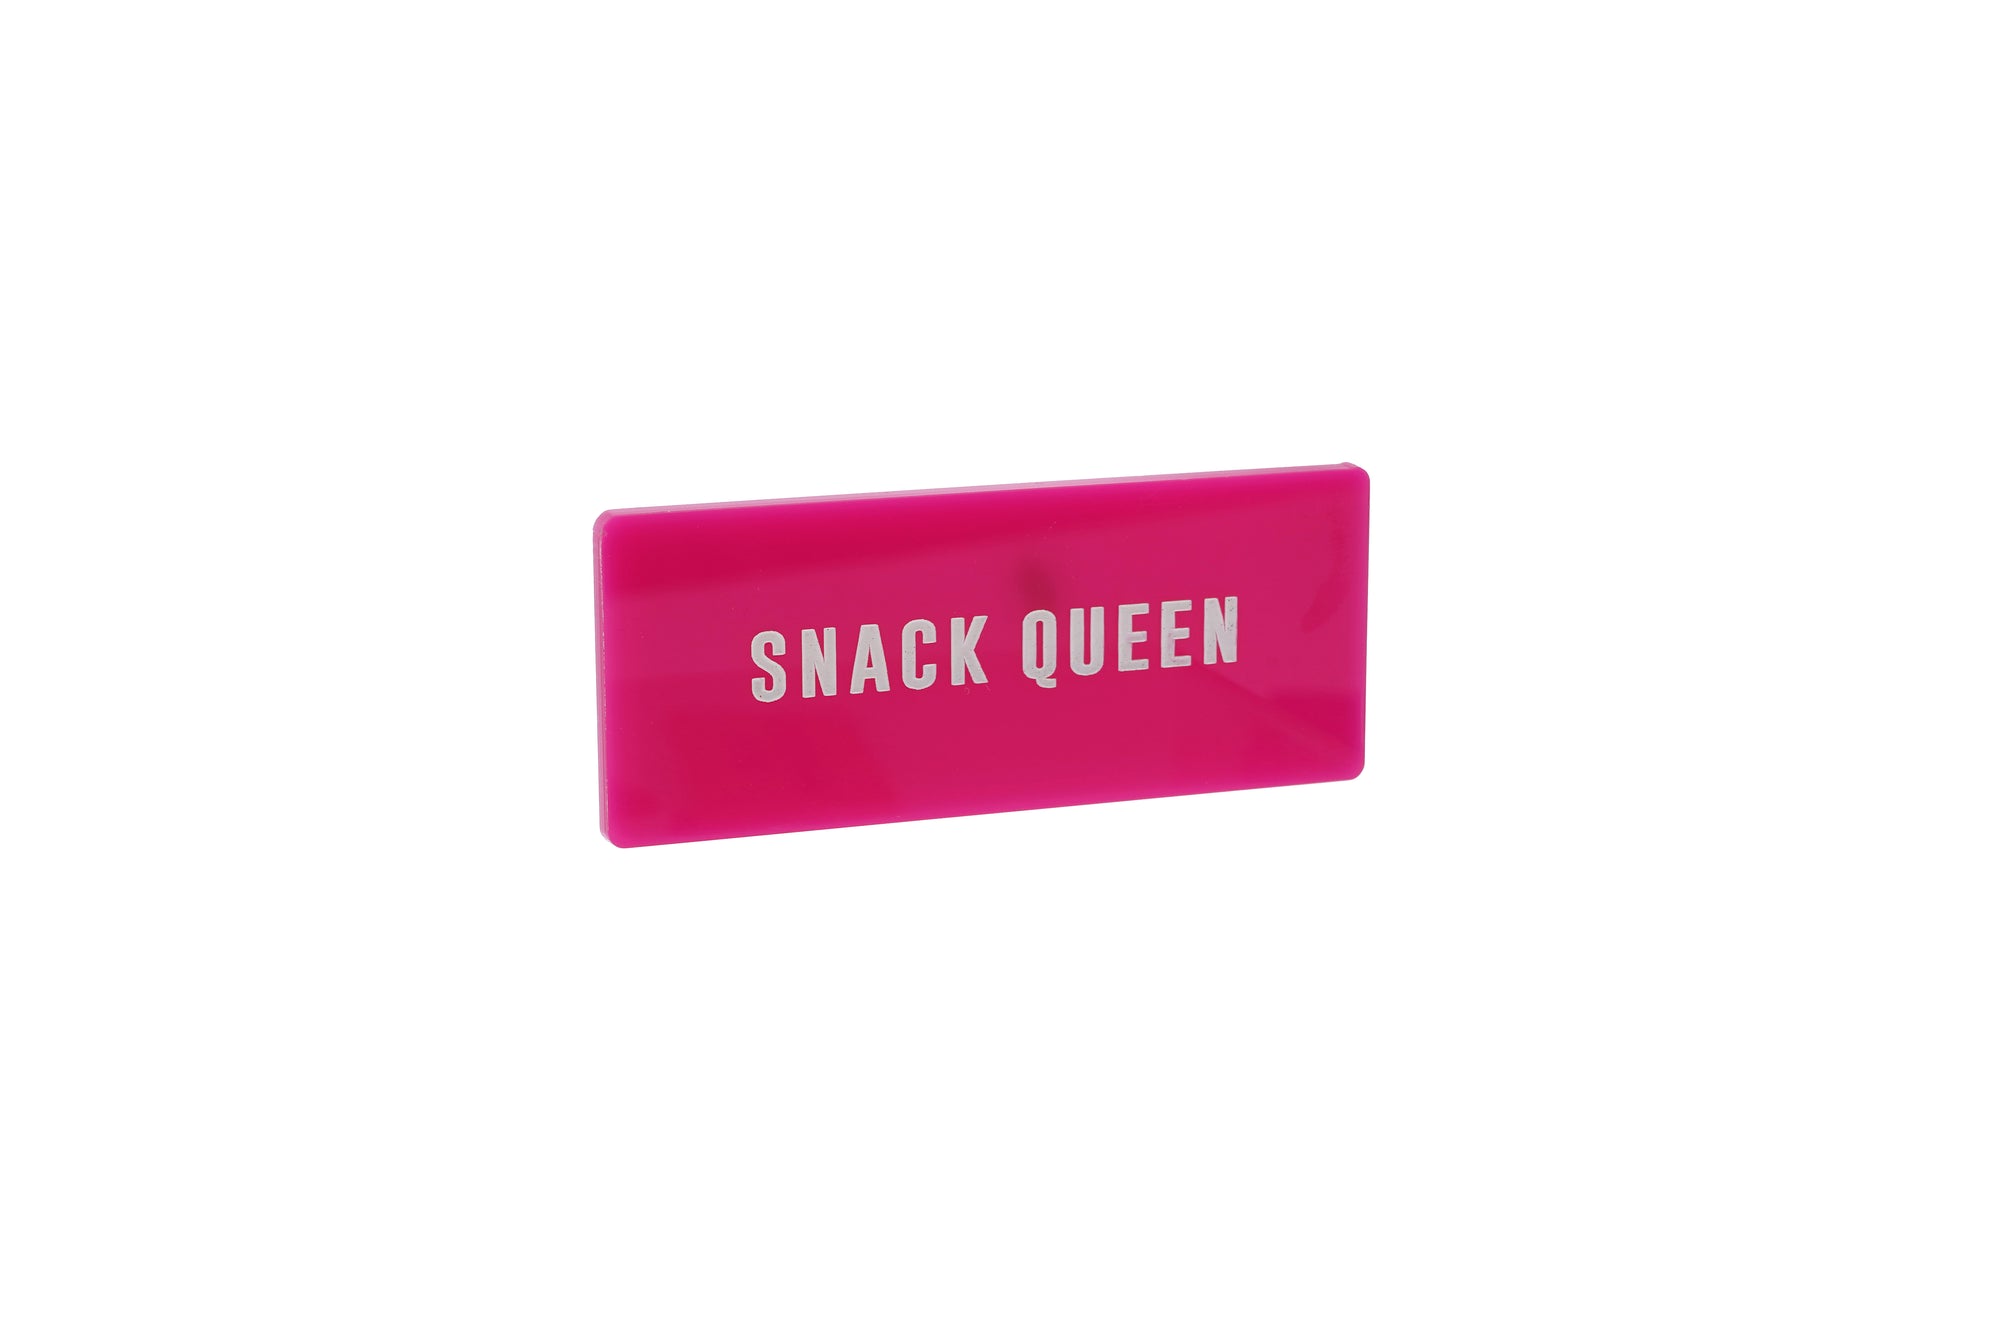 It's A Sign 'Snack Queen'  Fridge Magnet by penny black